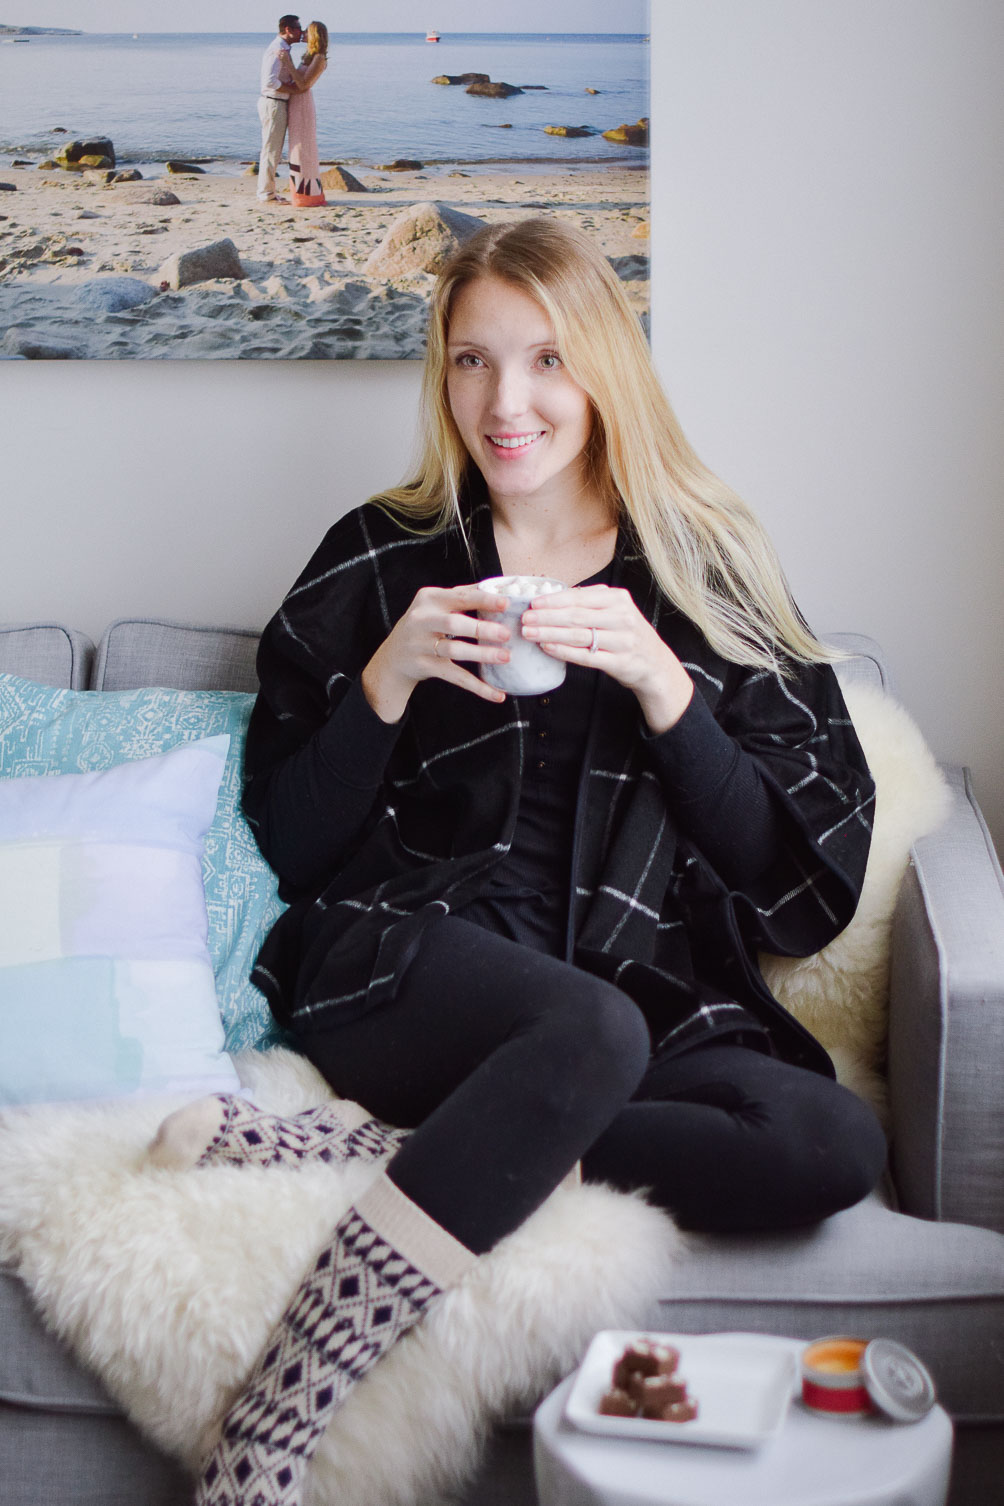 styling this cozy at home outfit with an Old Navy Cape, Lululemon leggings, and J.Crew wool socks